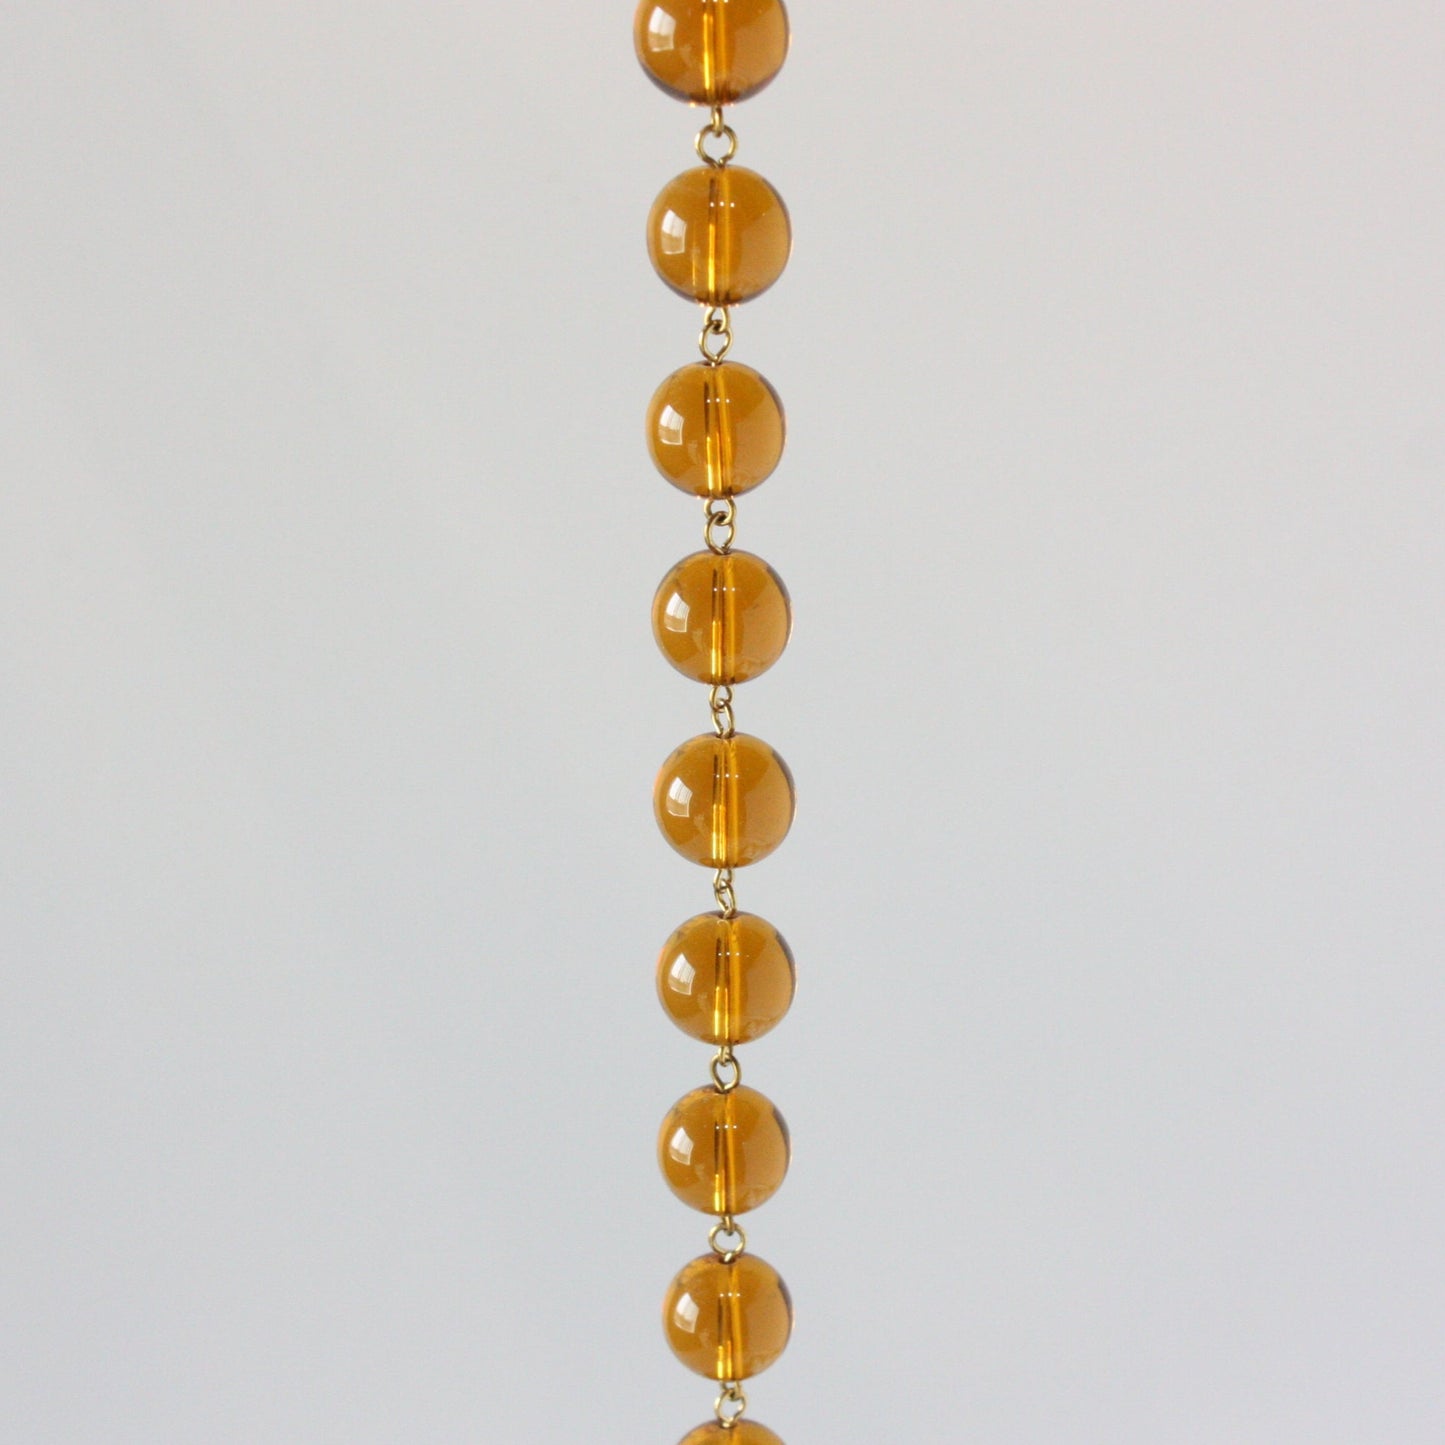 Amber 12mm Smooth Bead Chain, 1 Meter